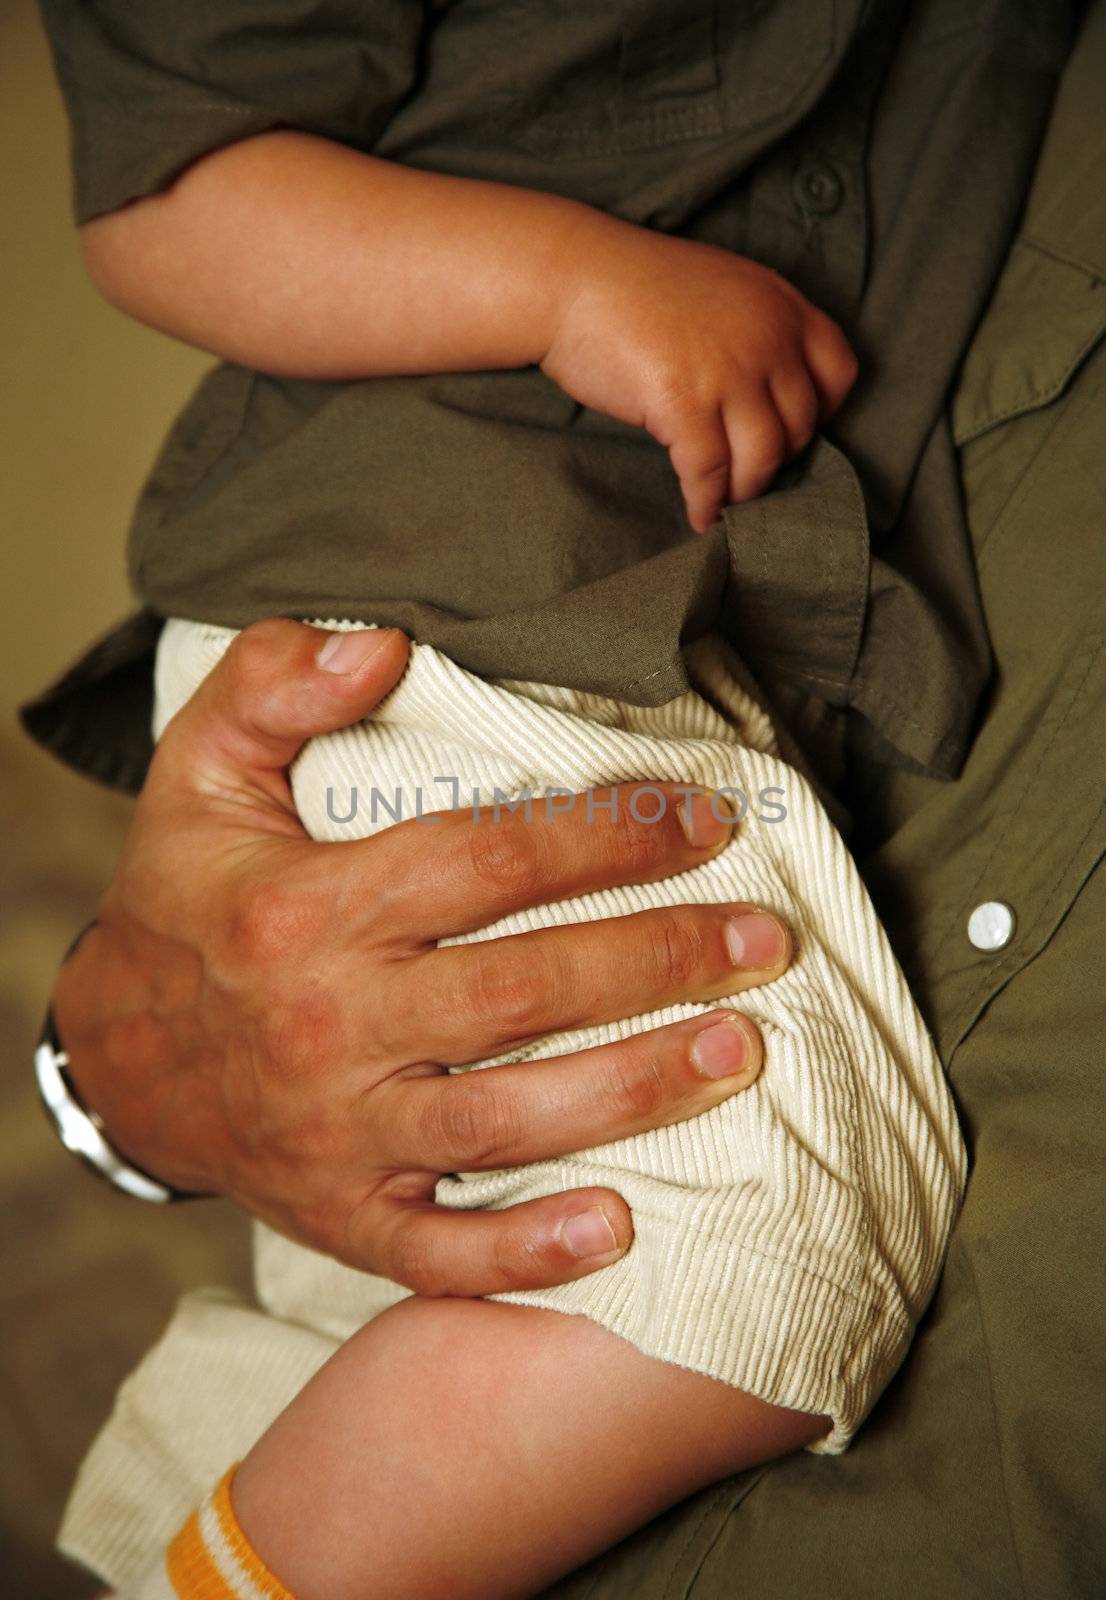 The image of hands of parents and the kid.